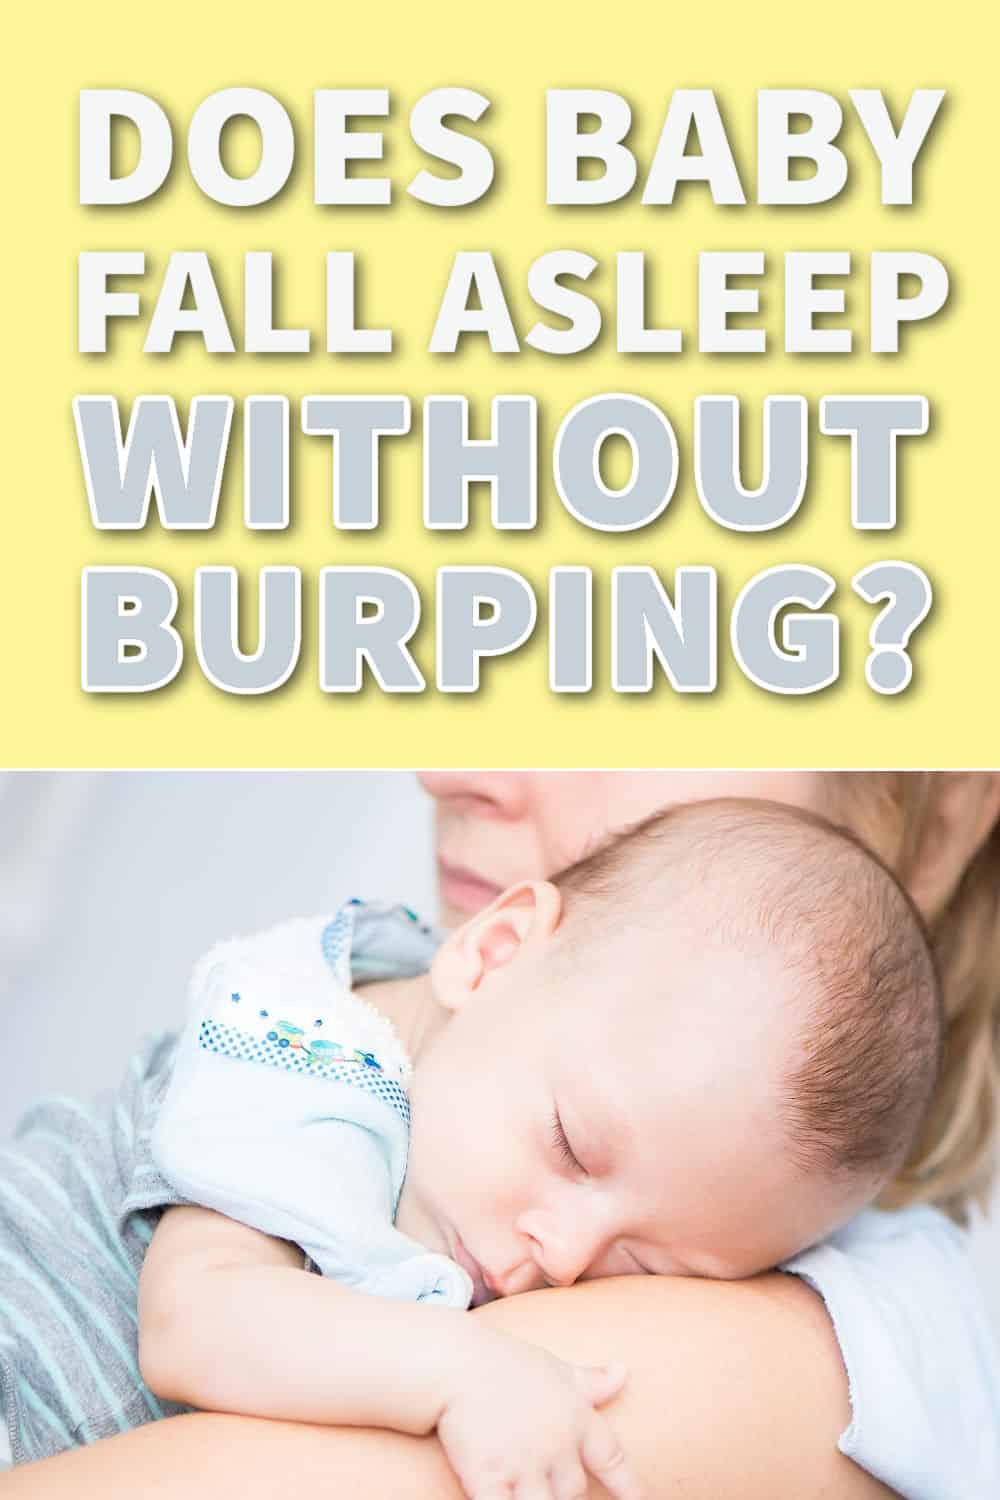 Is it OK to put baby to sleep without burping? (Yes, if you learn how to burp a sleeping baby)